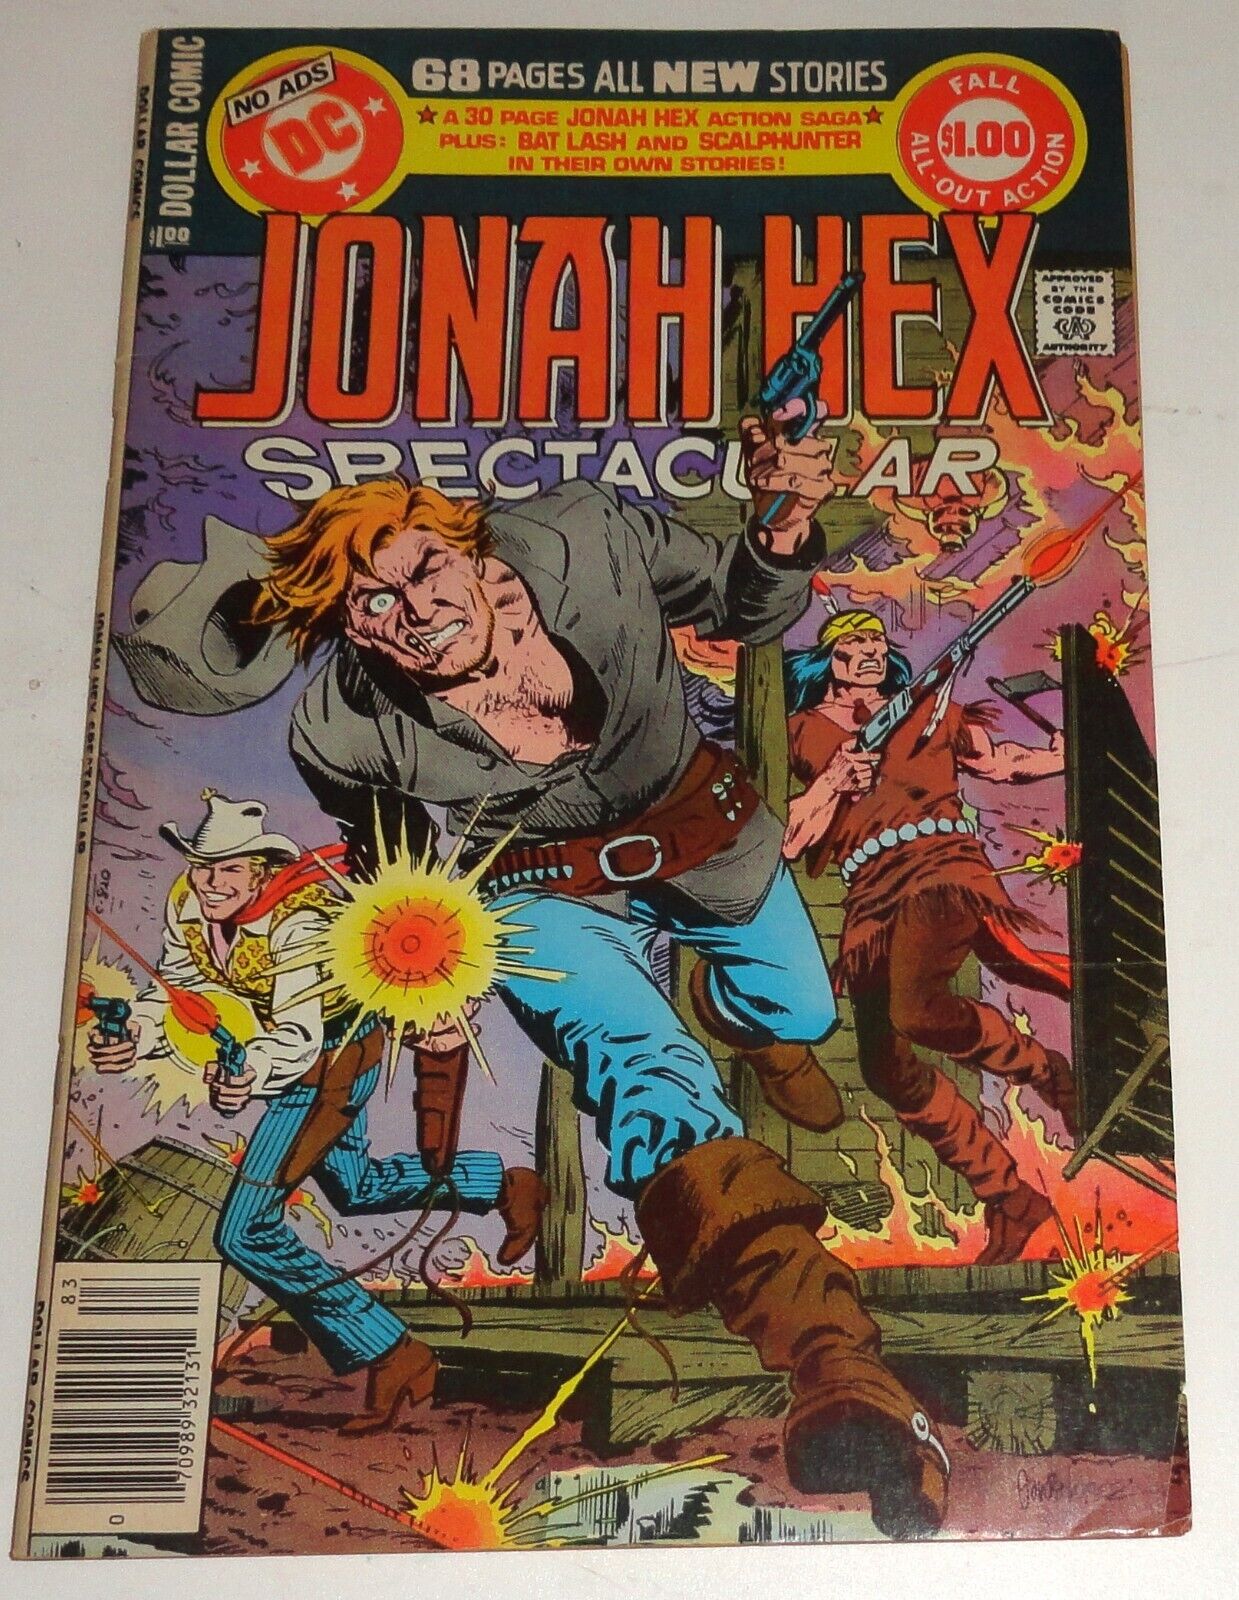 JONAH HEX SPECTACULAR  DEATH OF VF- 68 PAGE DOLLAR COMIC